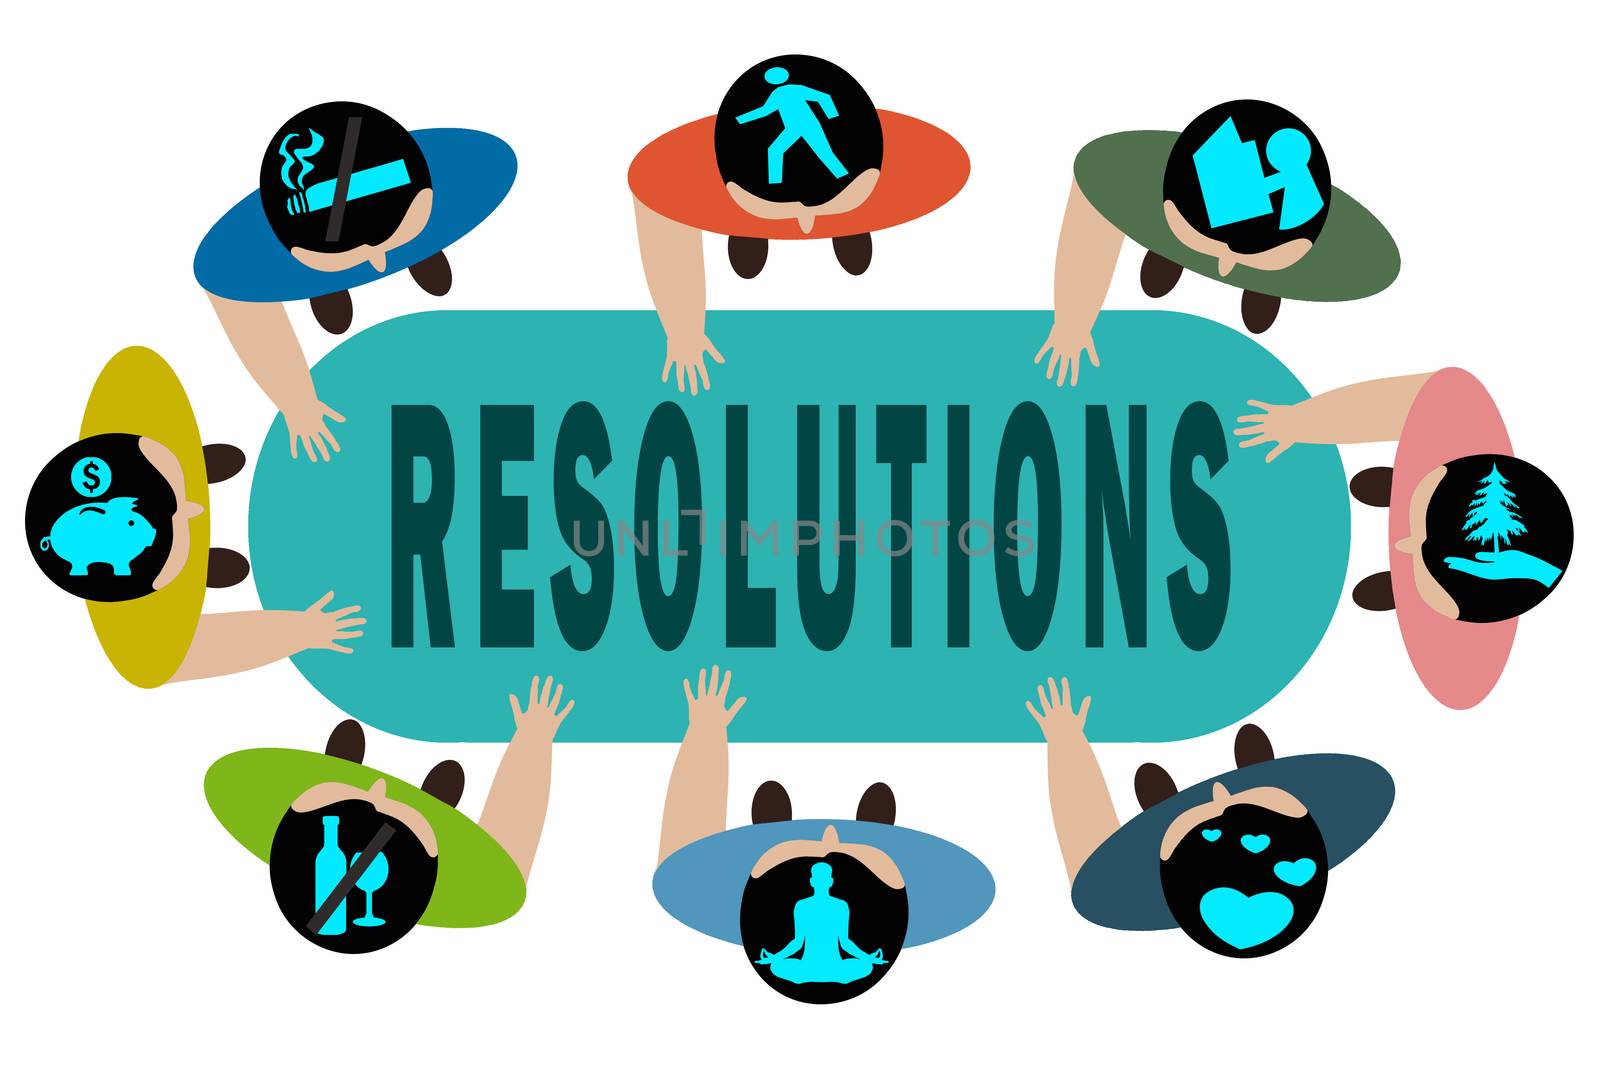 New Year's Resolution concept illustration isolated on white background.